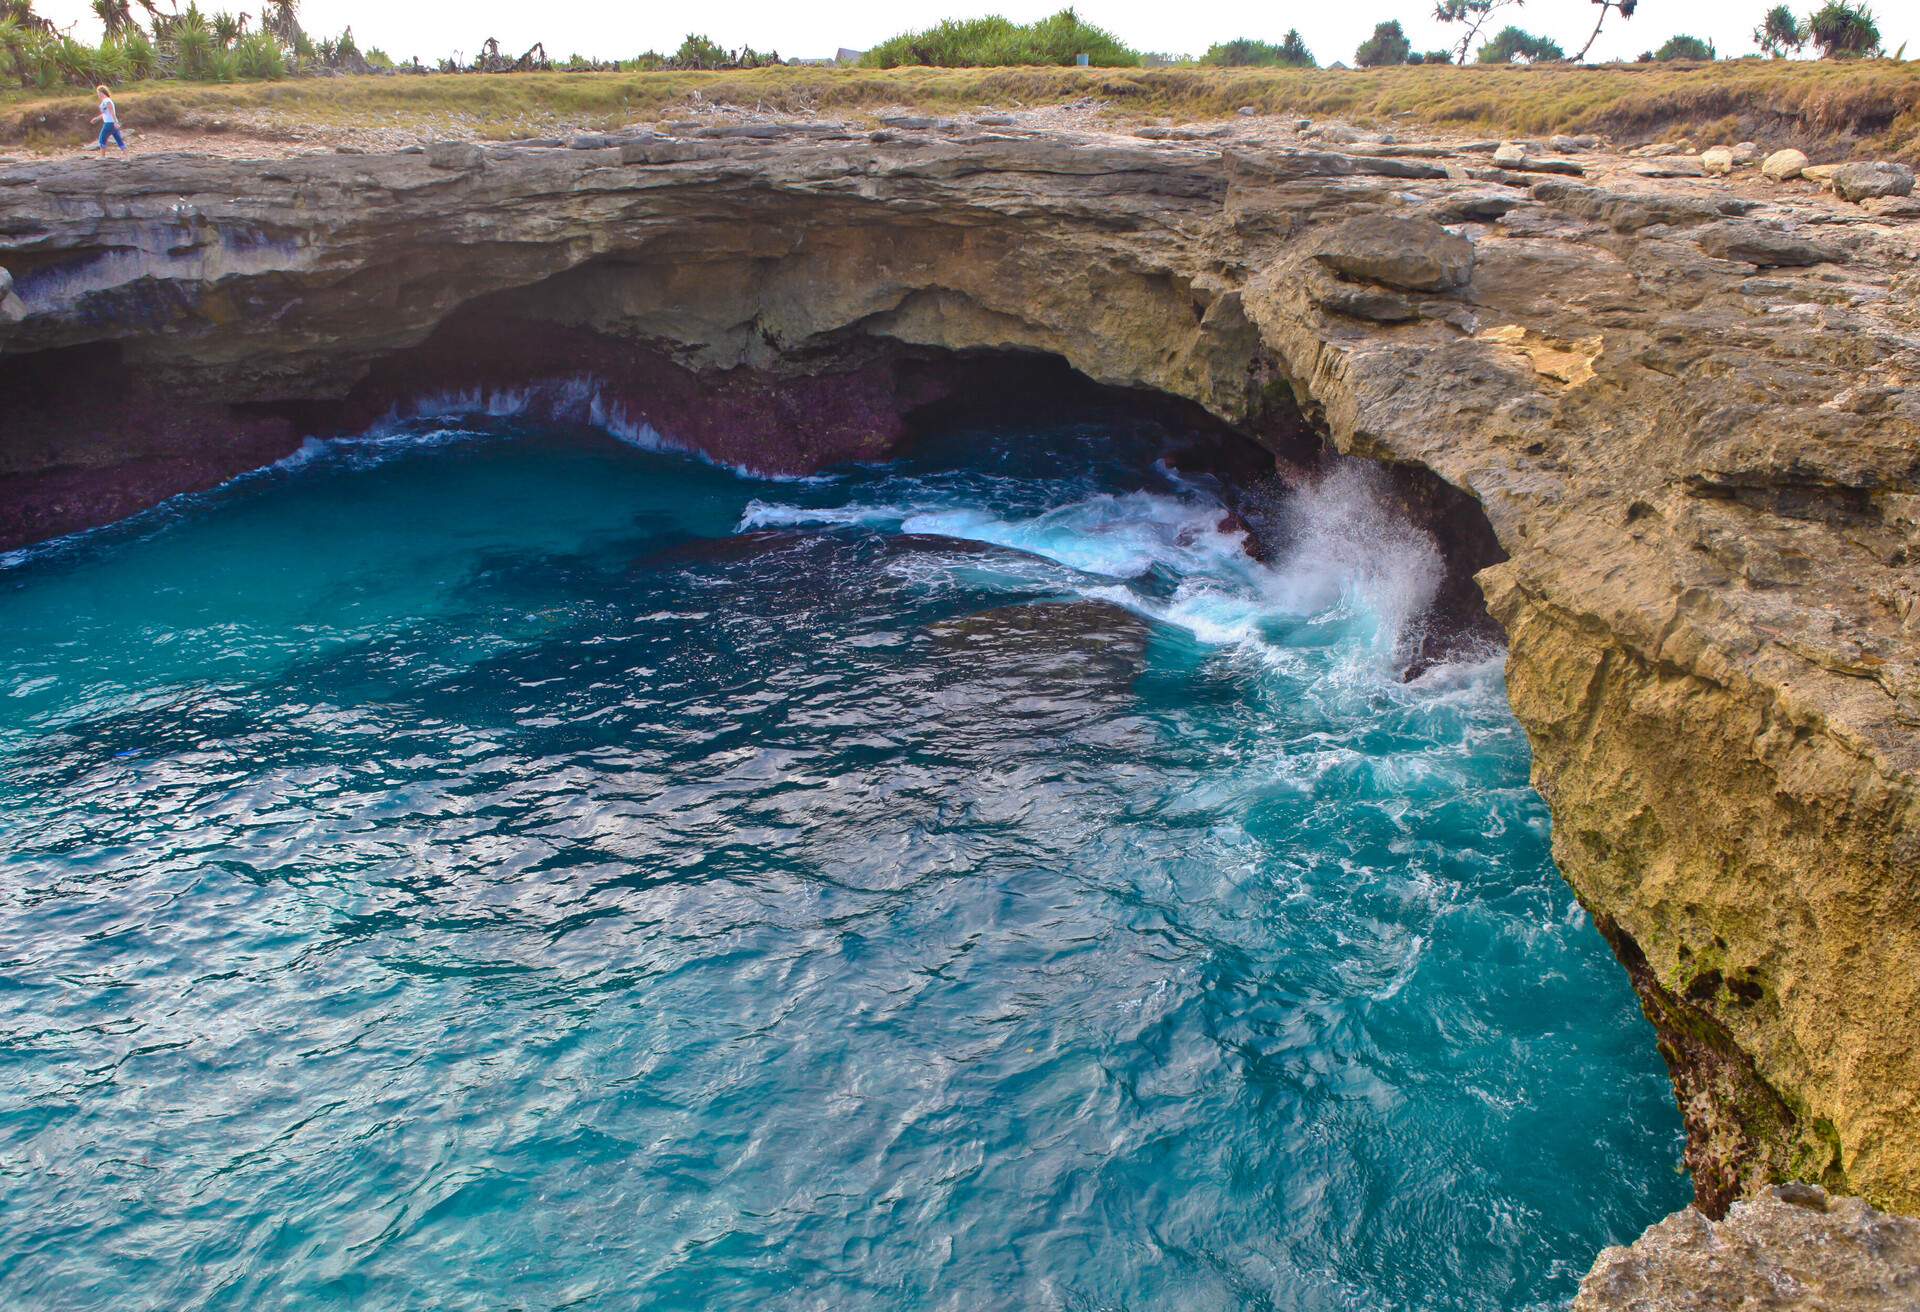 Devil's tears is a tidal pool with rough waves crashing into cliffside rocks.